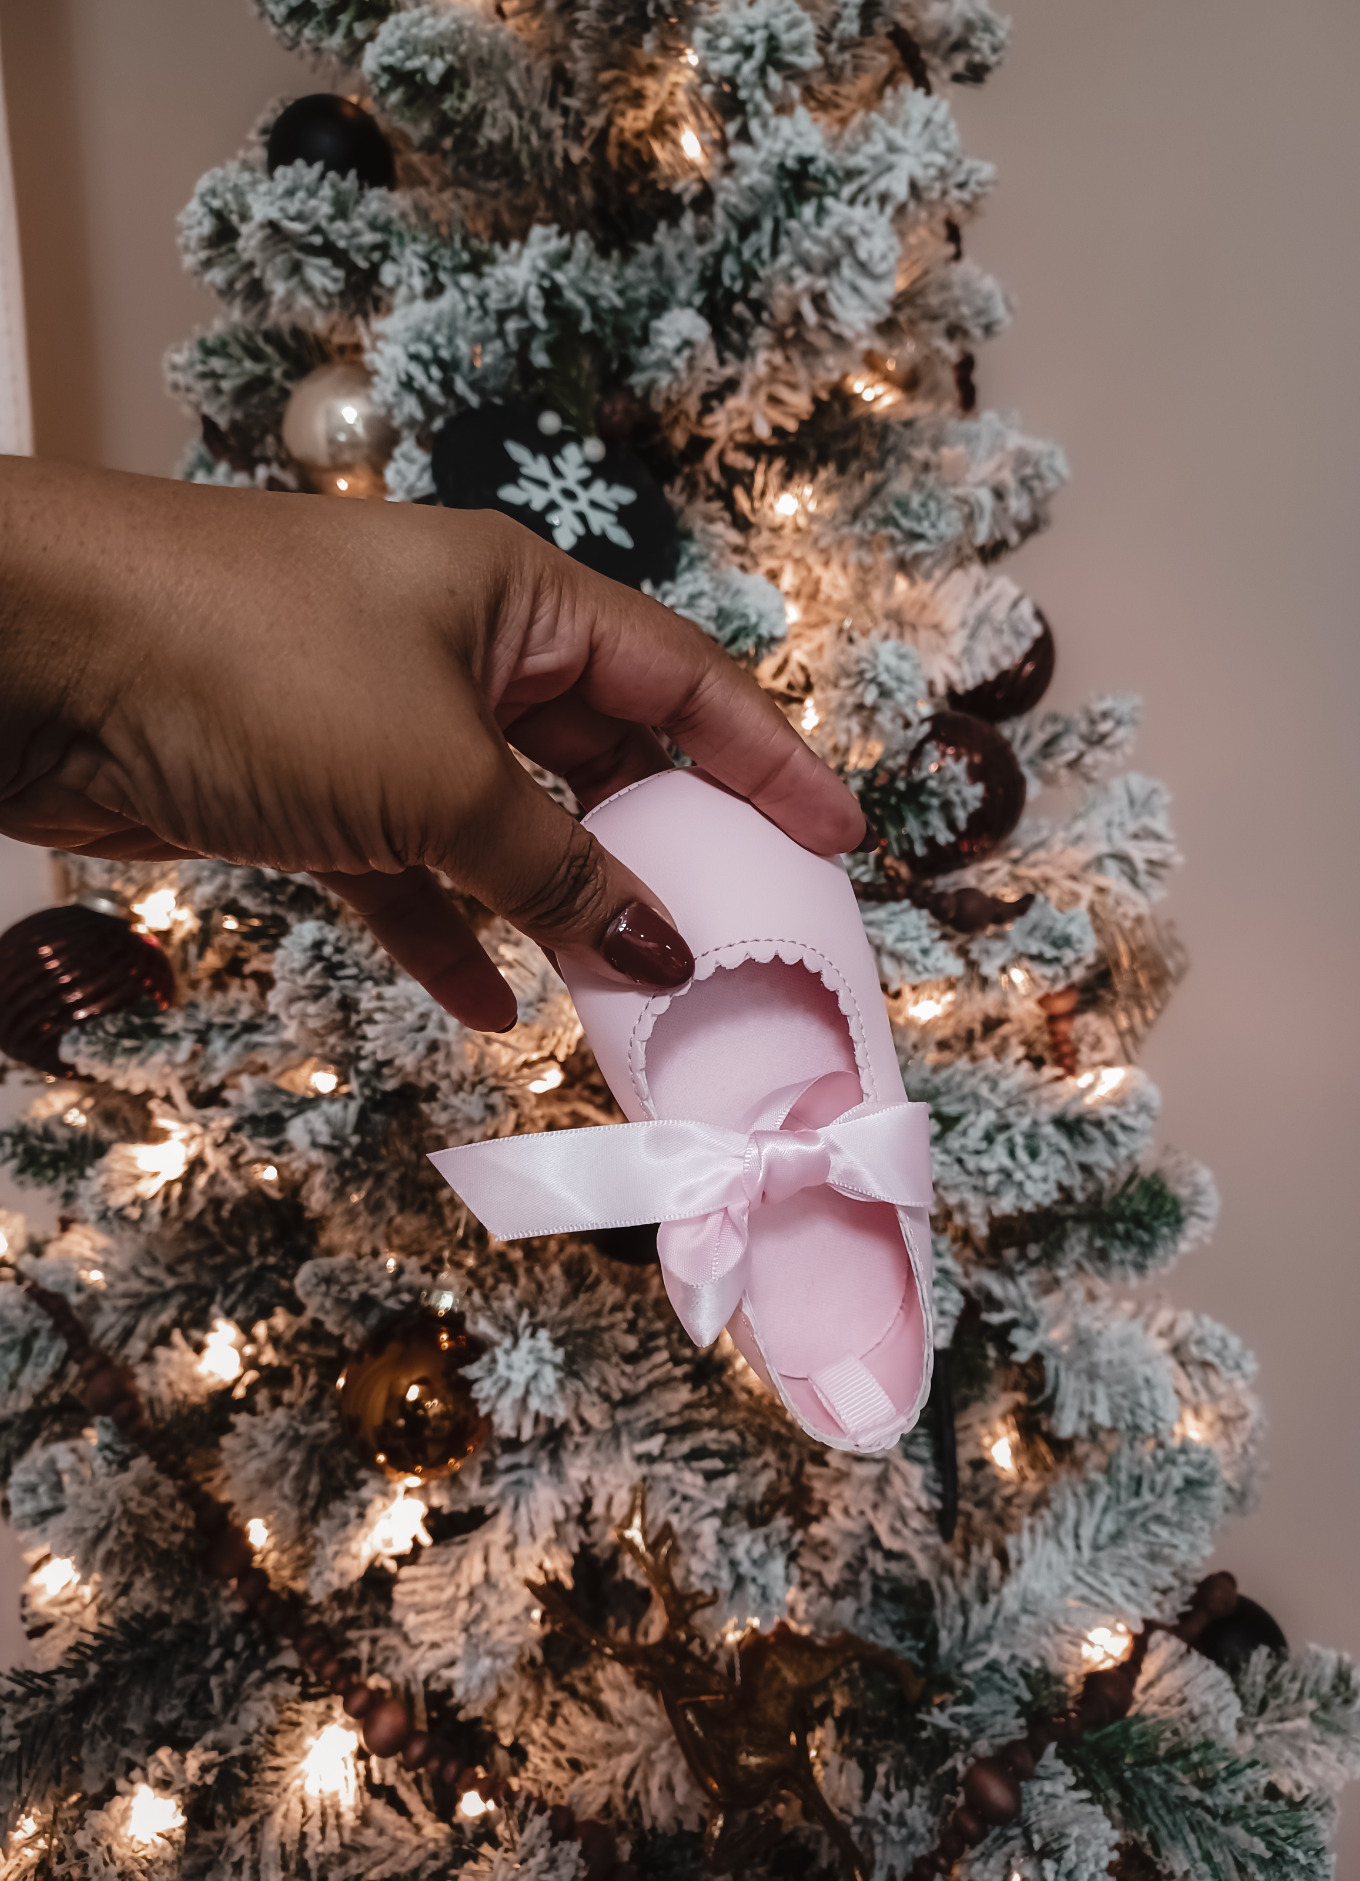 A pink baby bootie is shown in front of a Christmas tree